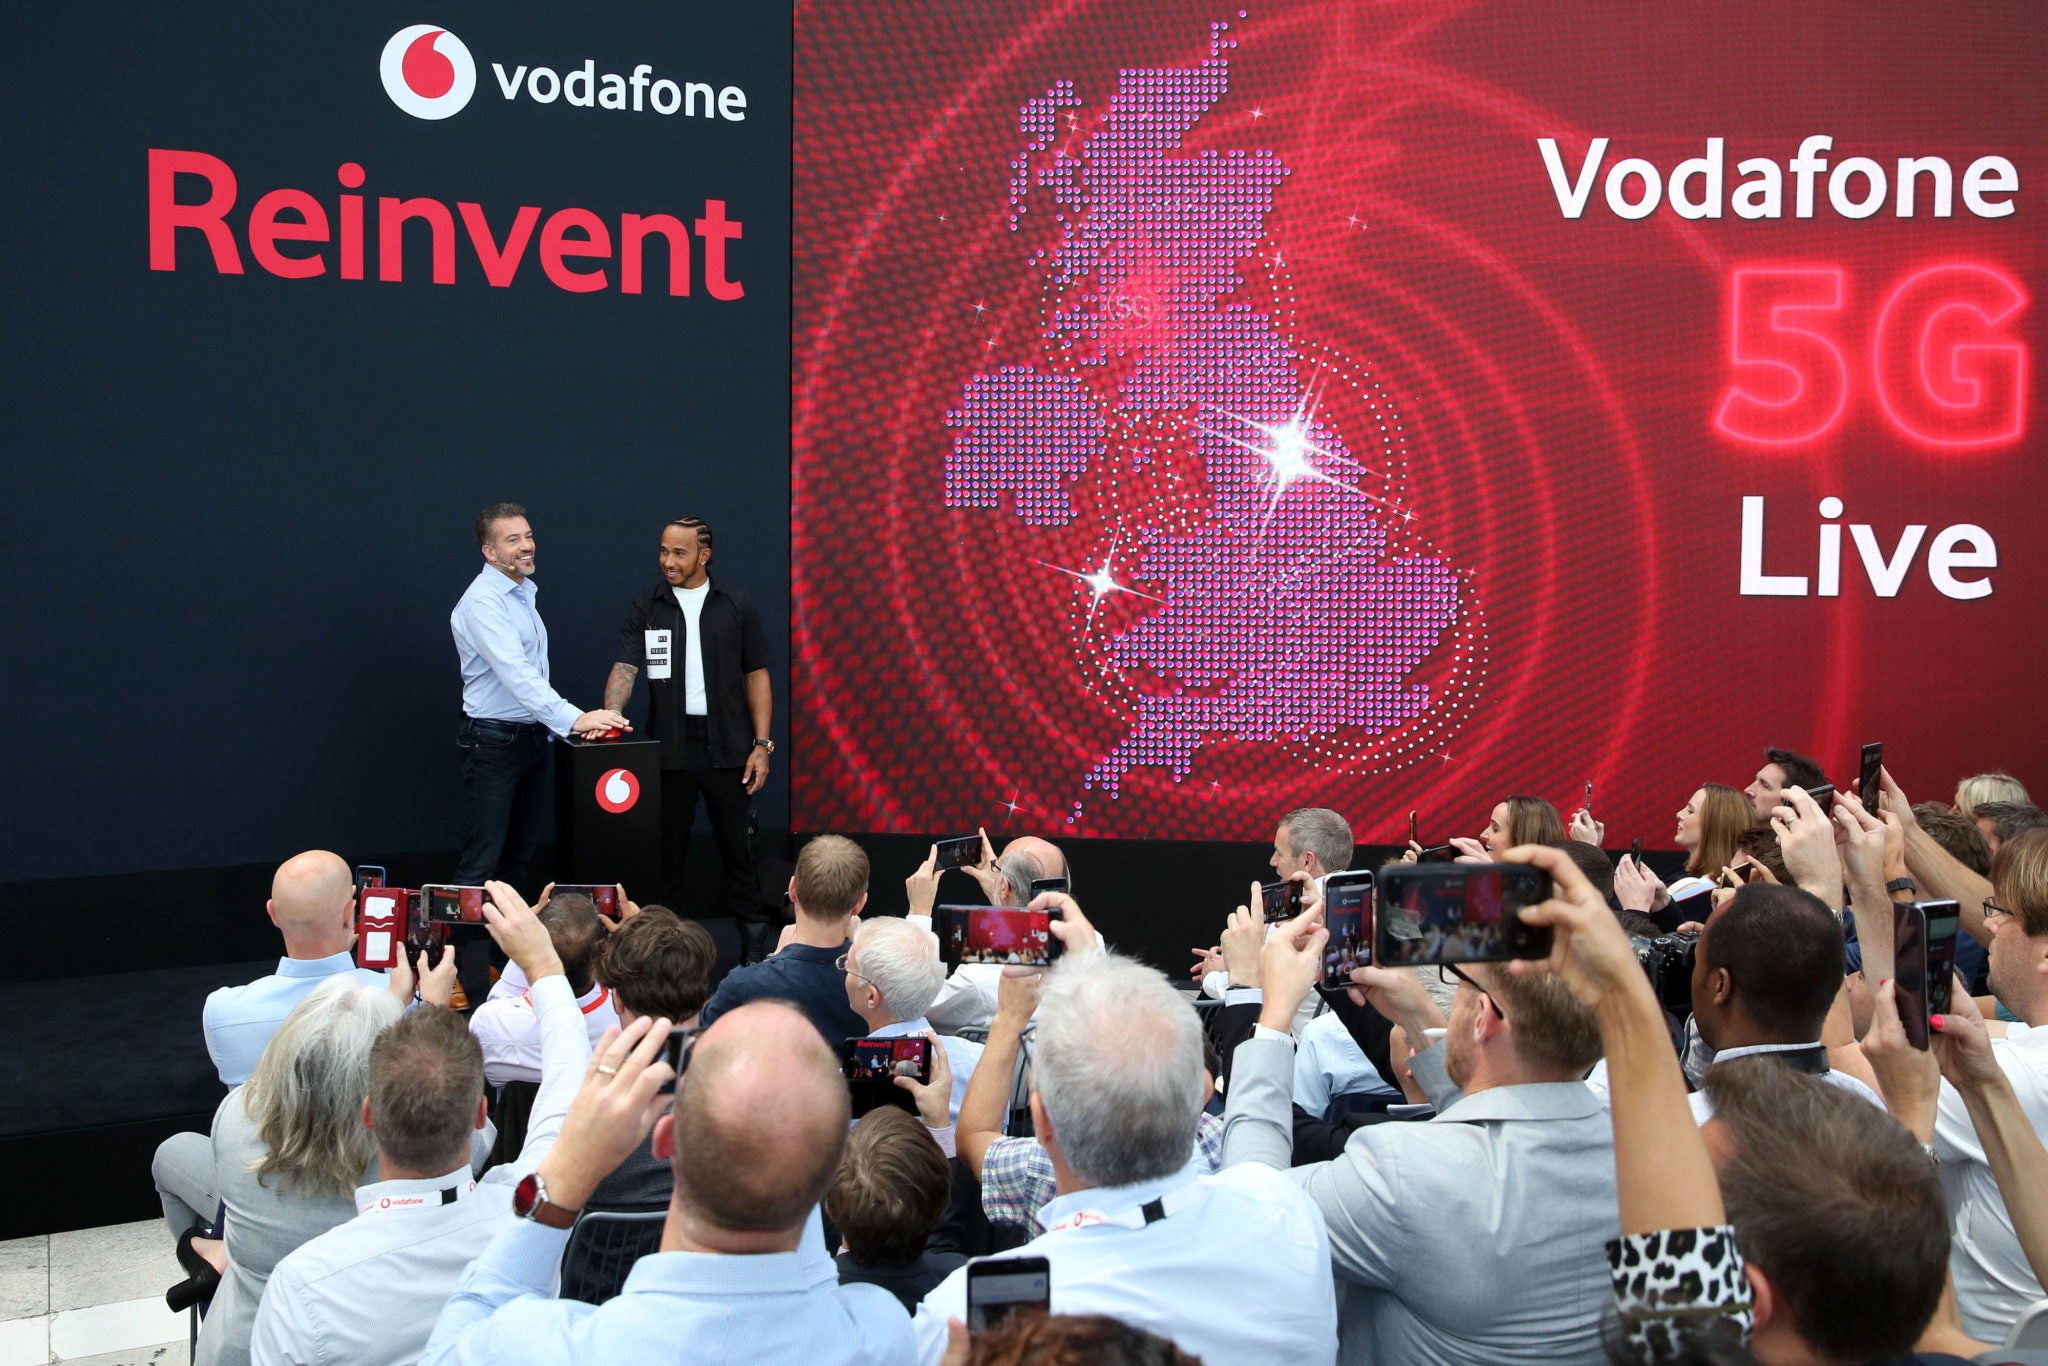 A Succinct Guide to Vodafone's 5G Launch